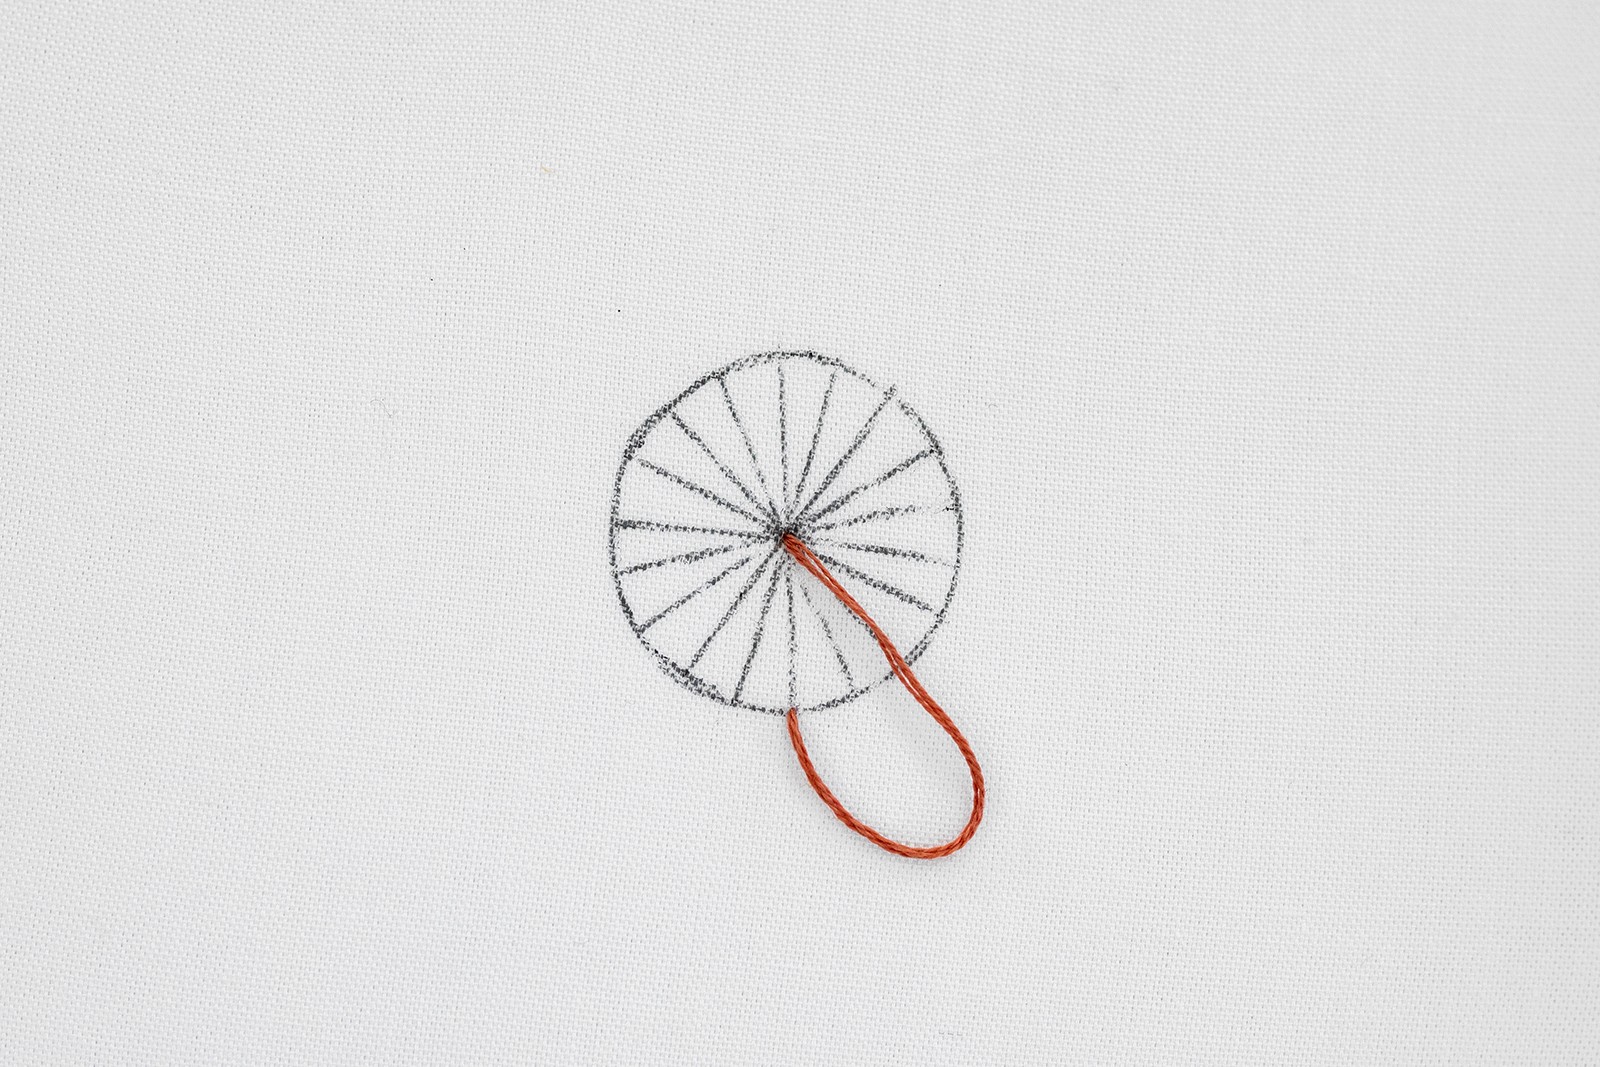 A thread goes through the middle of a drawing of a wheel.